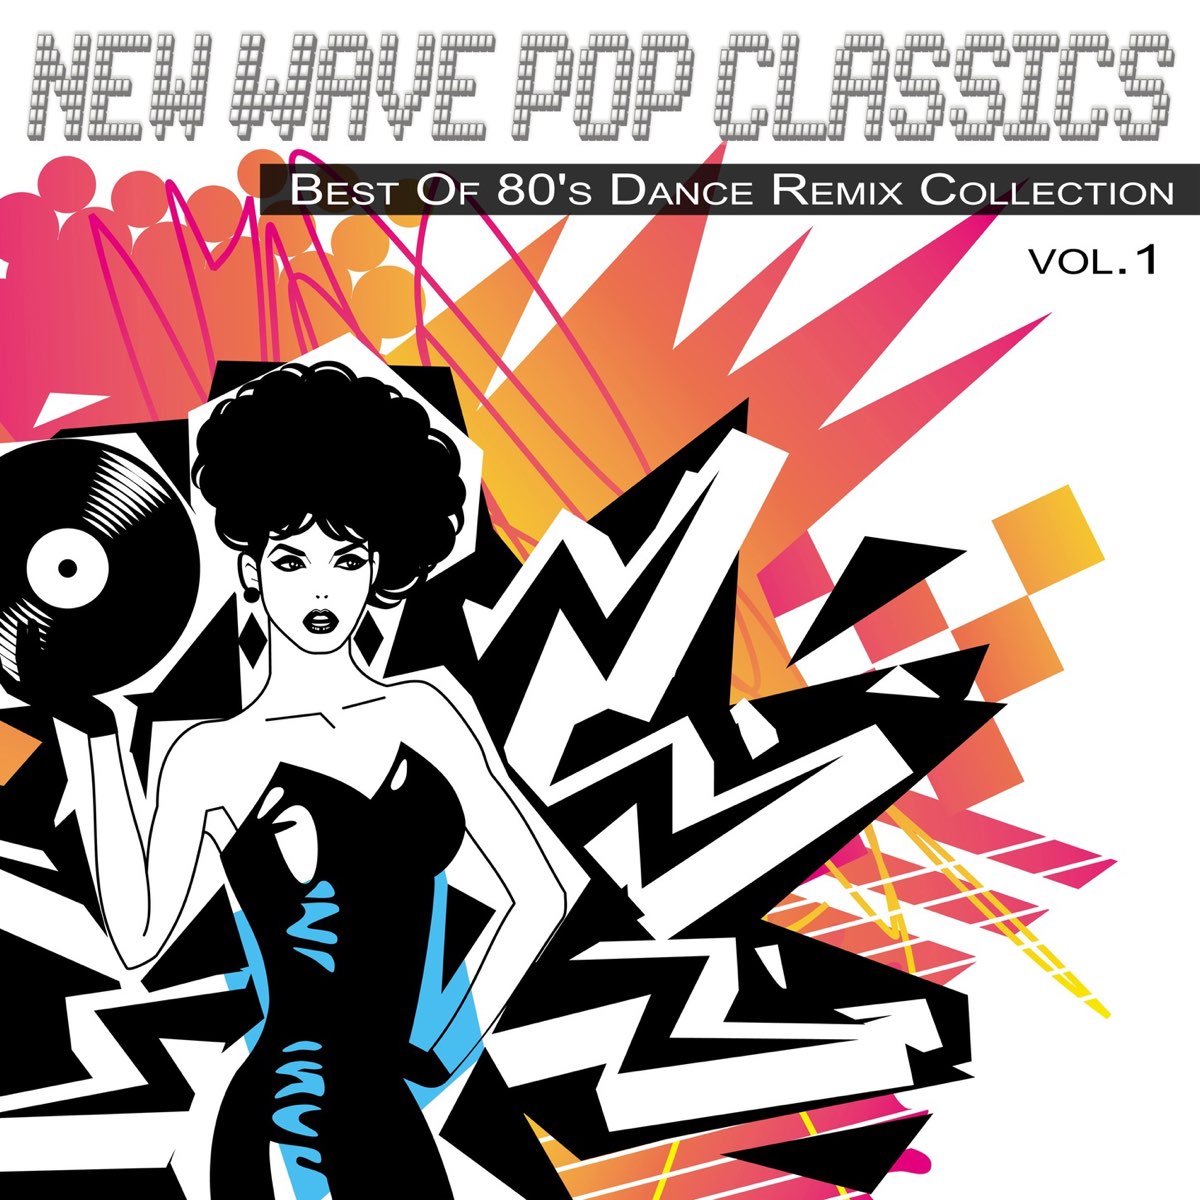 New Wave Pop Classics Vol.1 - Best of 80's Dance Remix Collection by  Various Artists on Apple Music